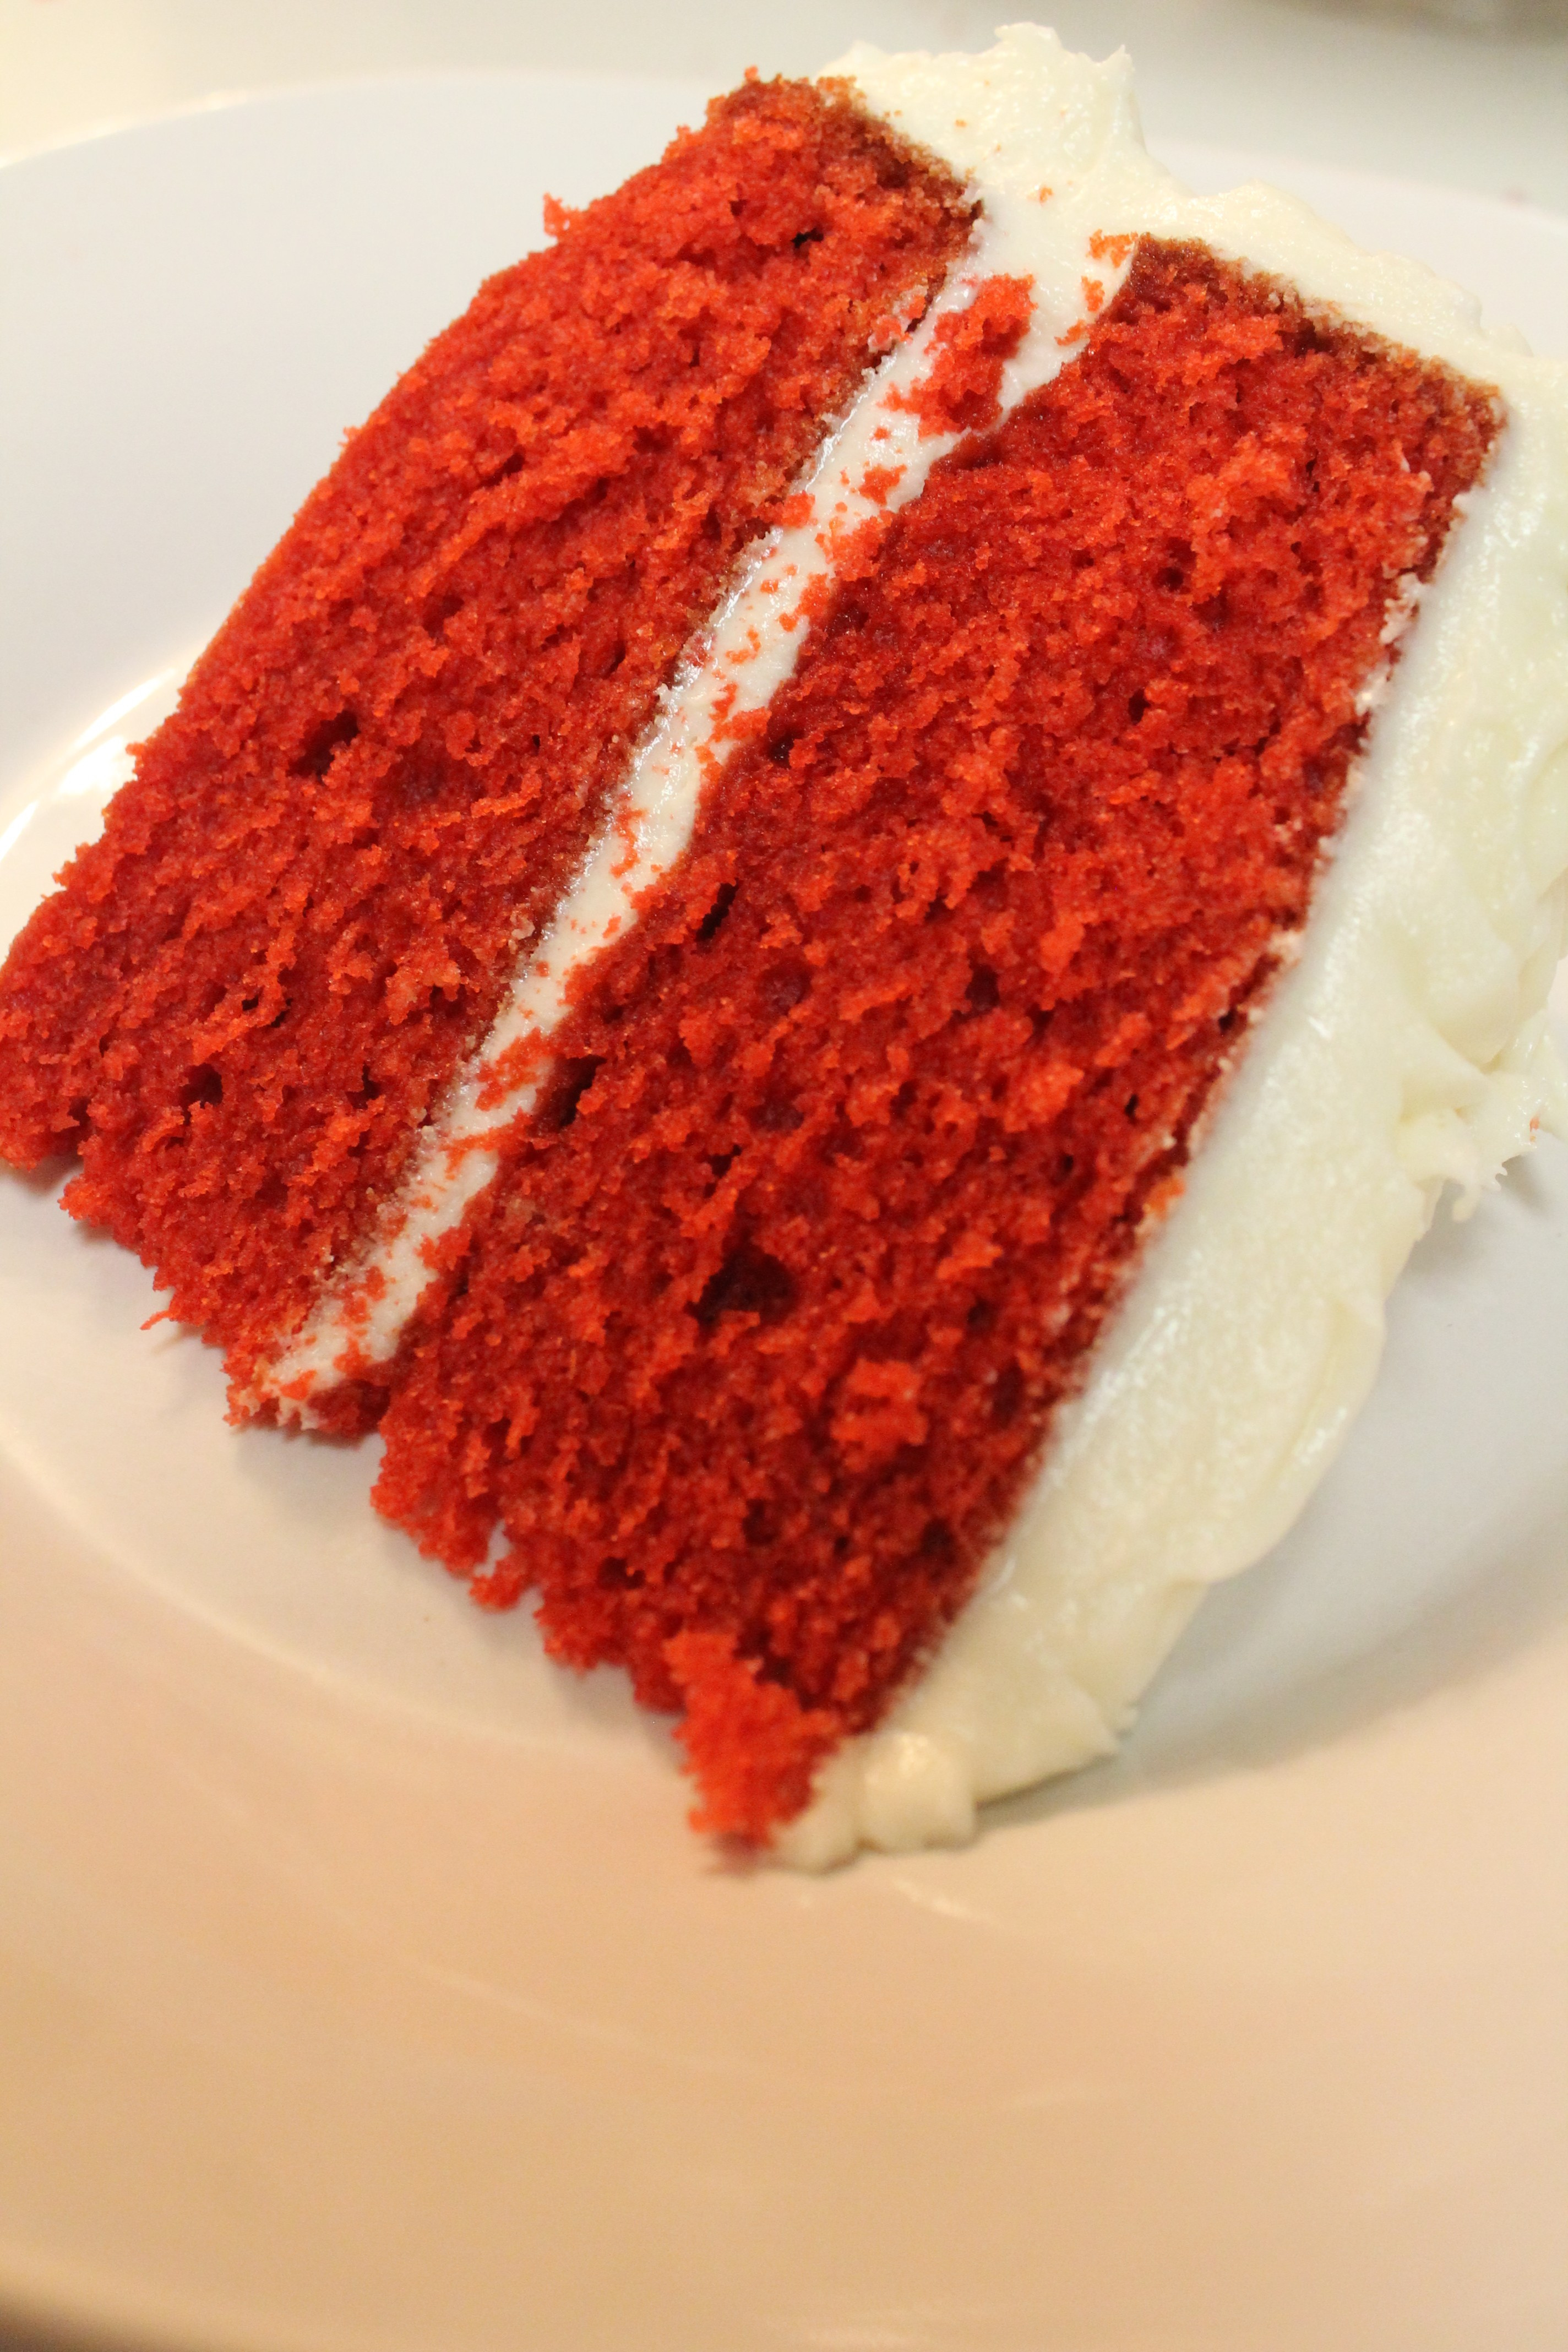 Red Velvet Cake Recipe From Scratch
 The BEST and EASIEST Red Velvet Cake Recipe